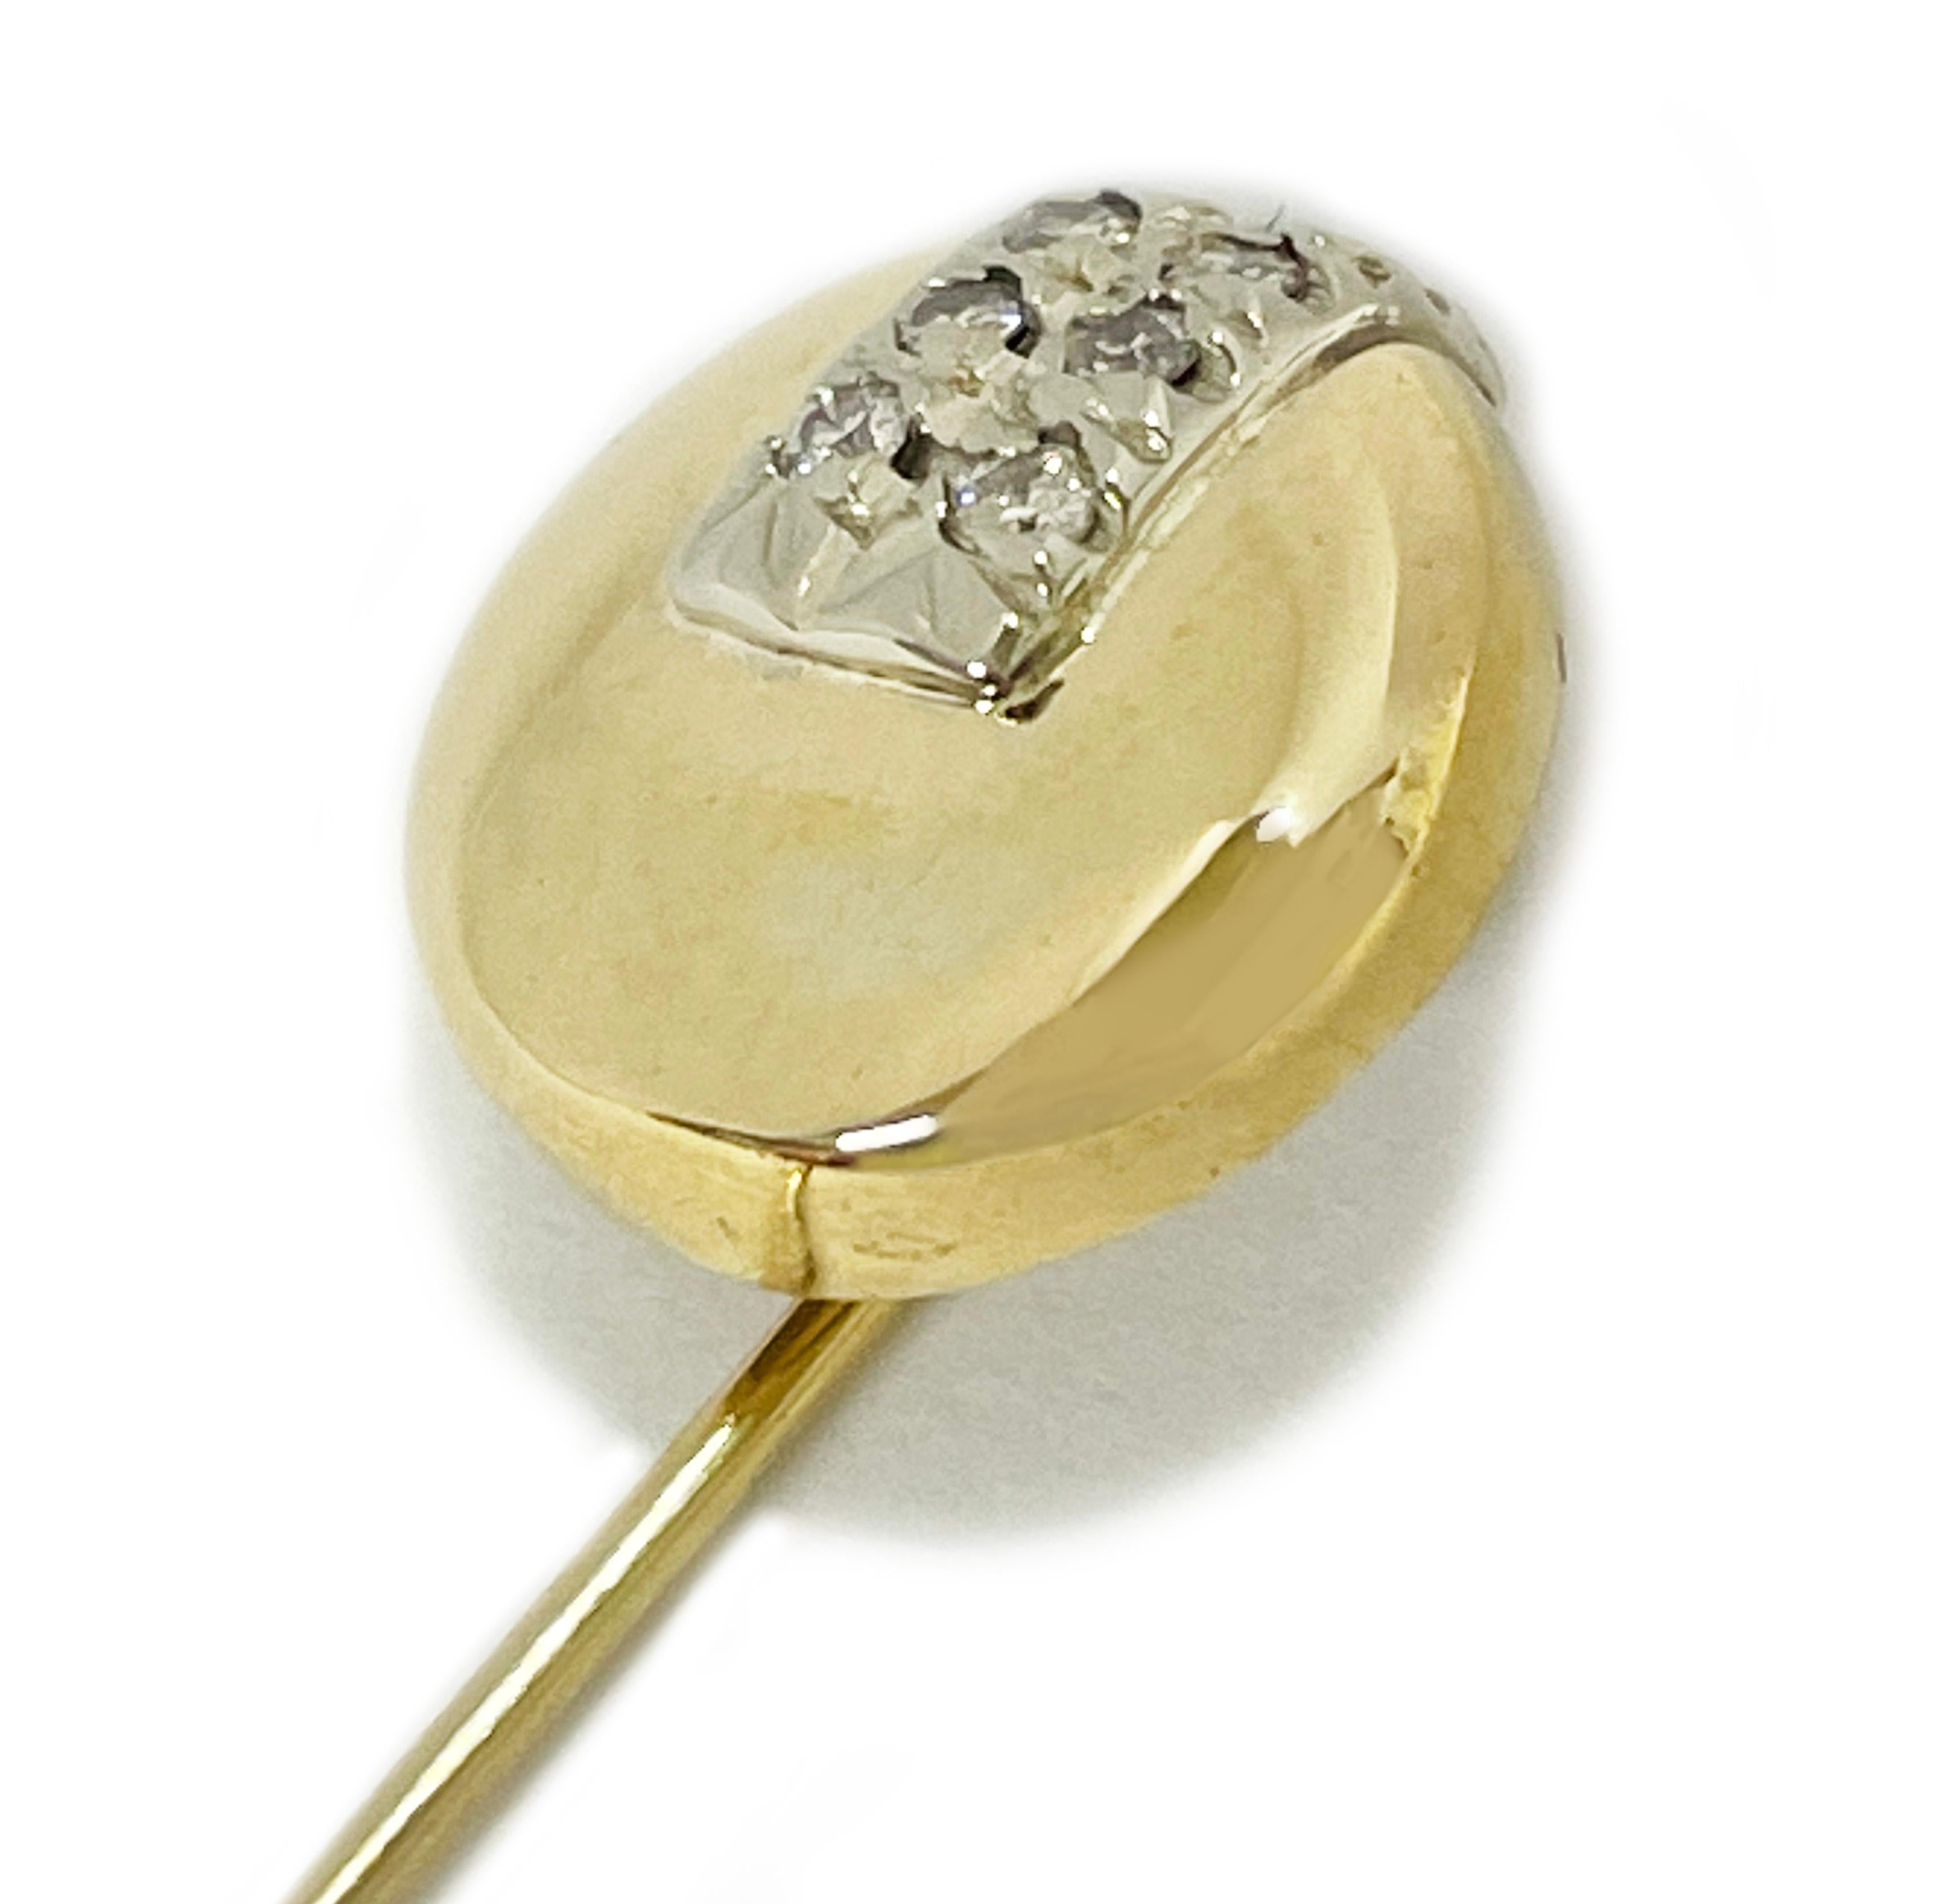 14 Karat Yellow Gold Circular Diamond Stick Pin. Simple and beautiful design featuring eight brilliant-cut diamonds set in white gold. The diamonds measure 1.72mm for a carat total weight of 0.16ctw. The diamonds are I1-I2 in clarity (G.I.A.) and